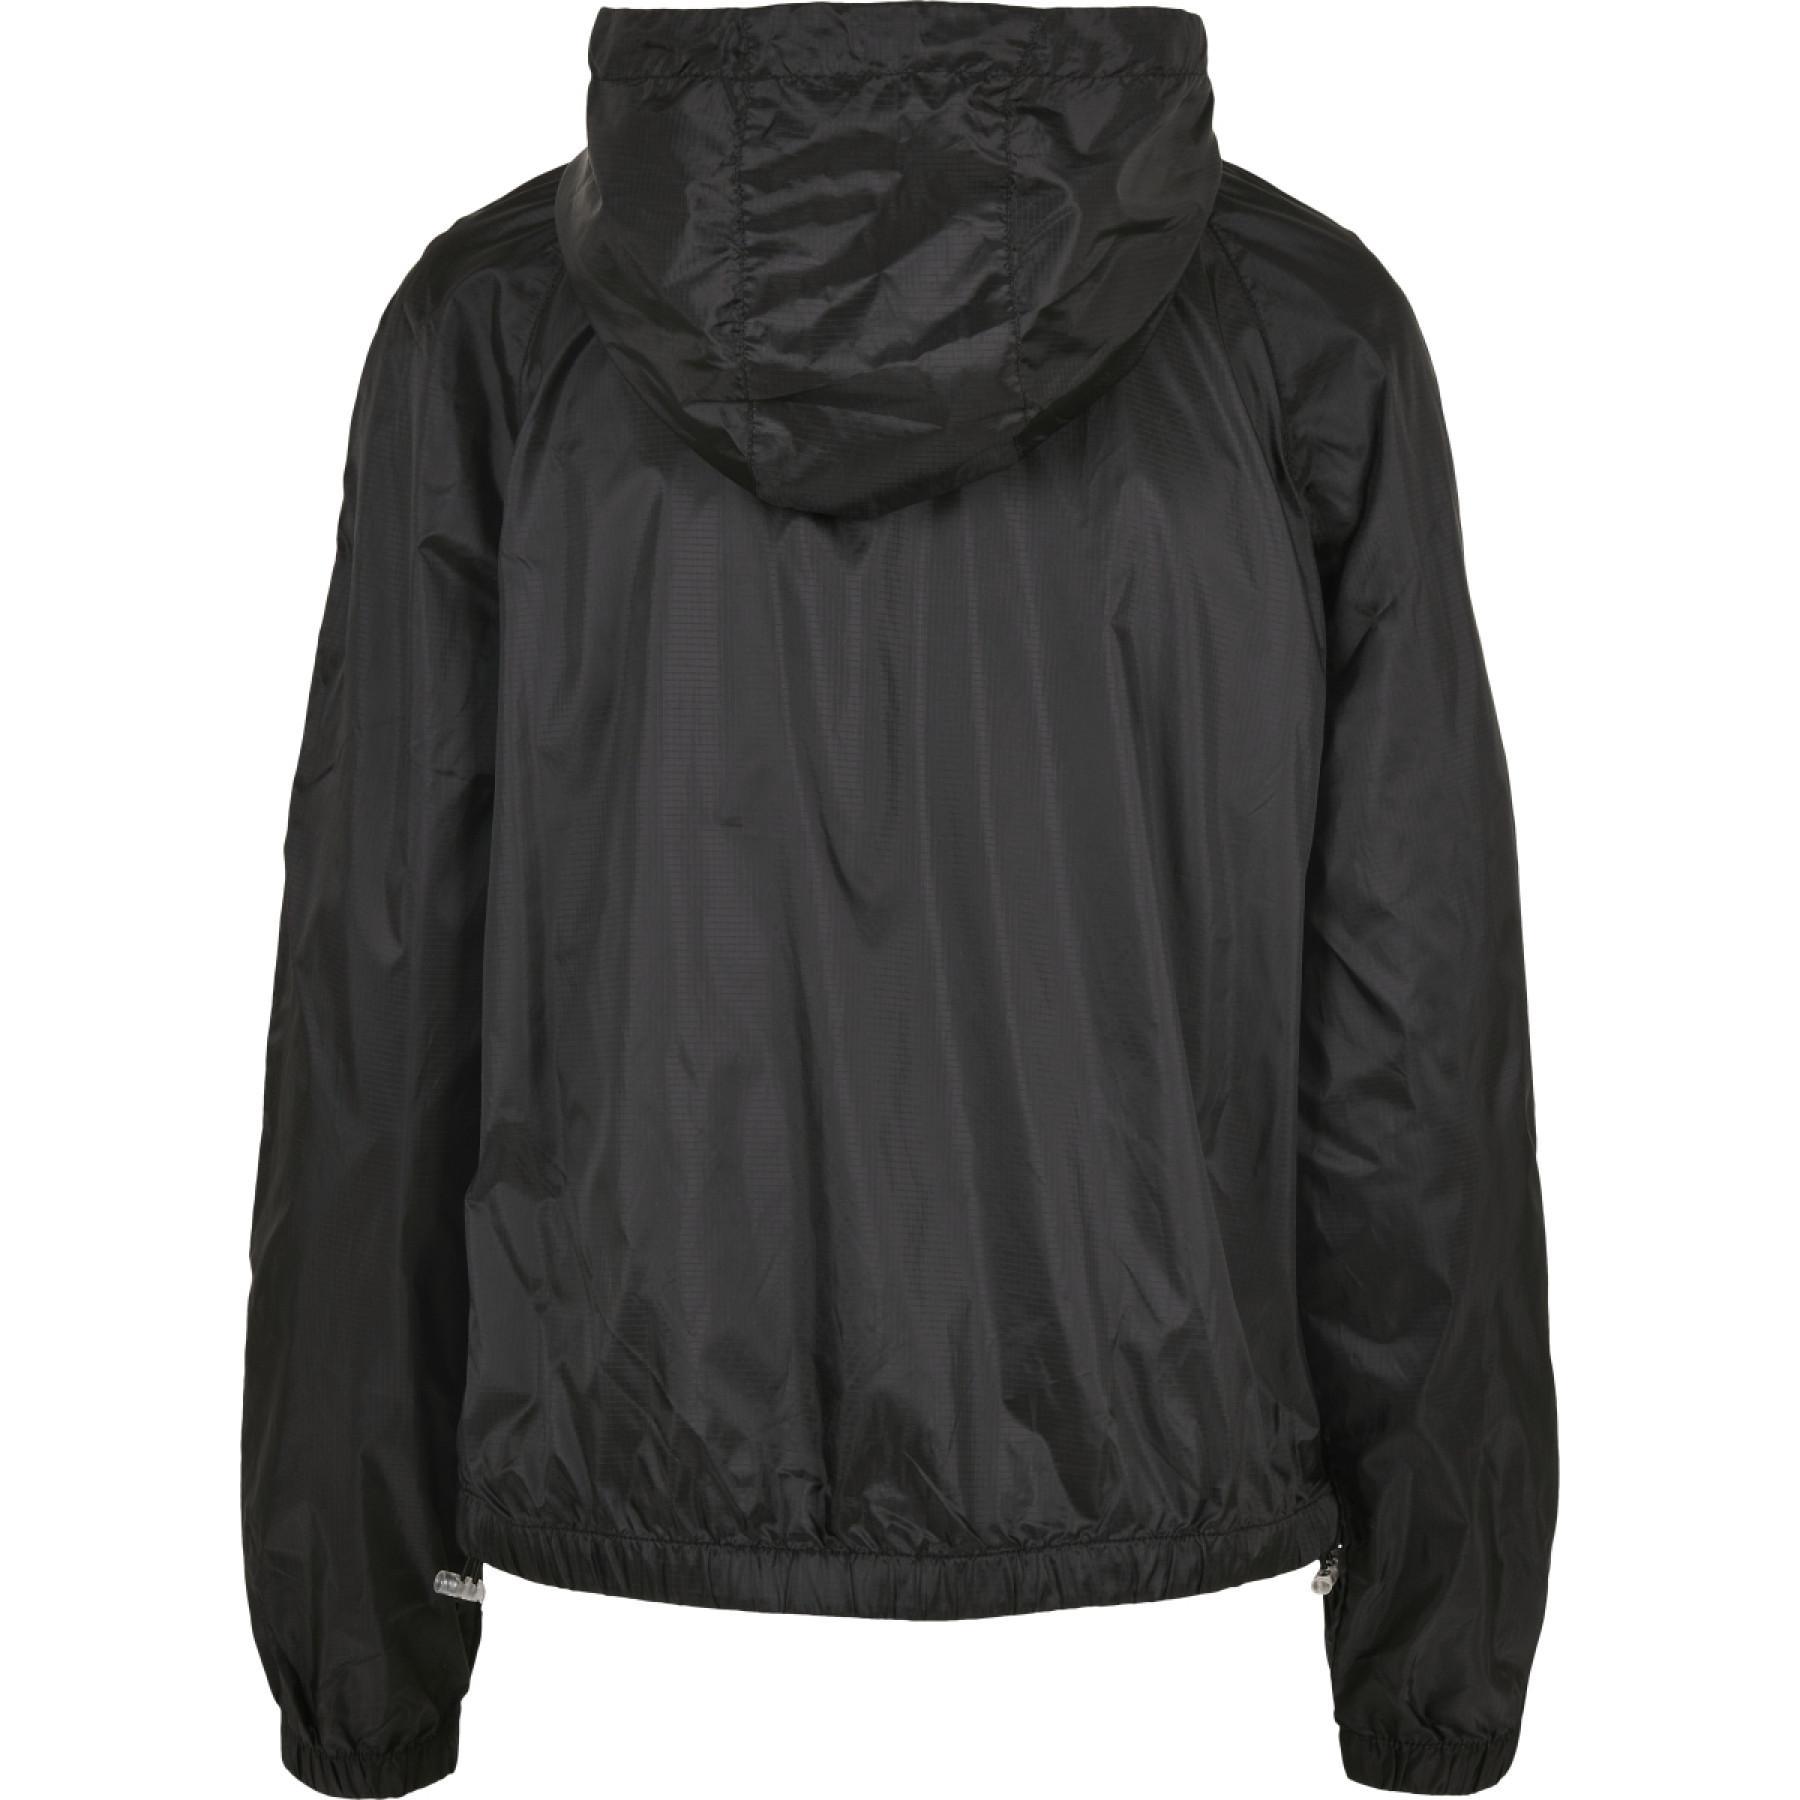 Chaqueta impermeable para mujer Urban Classics light pull over